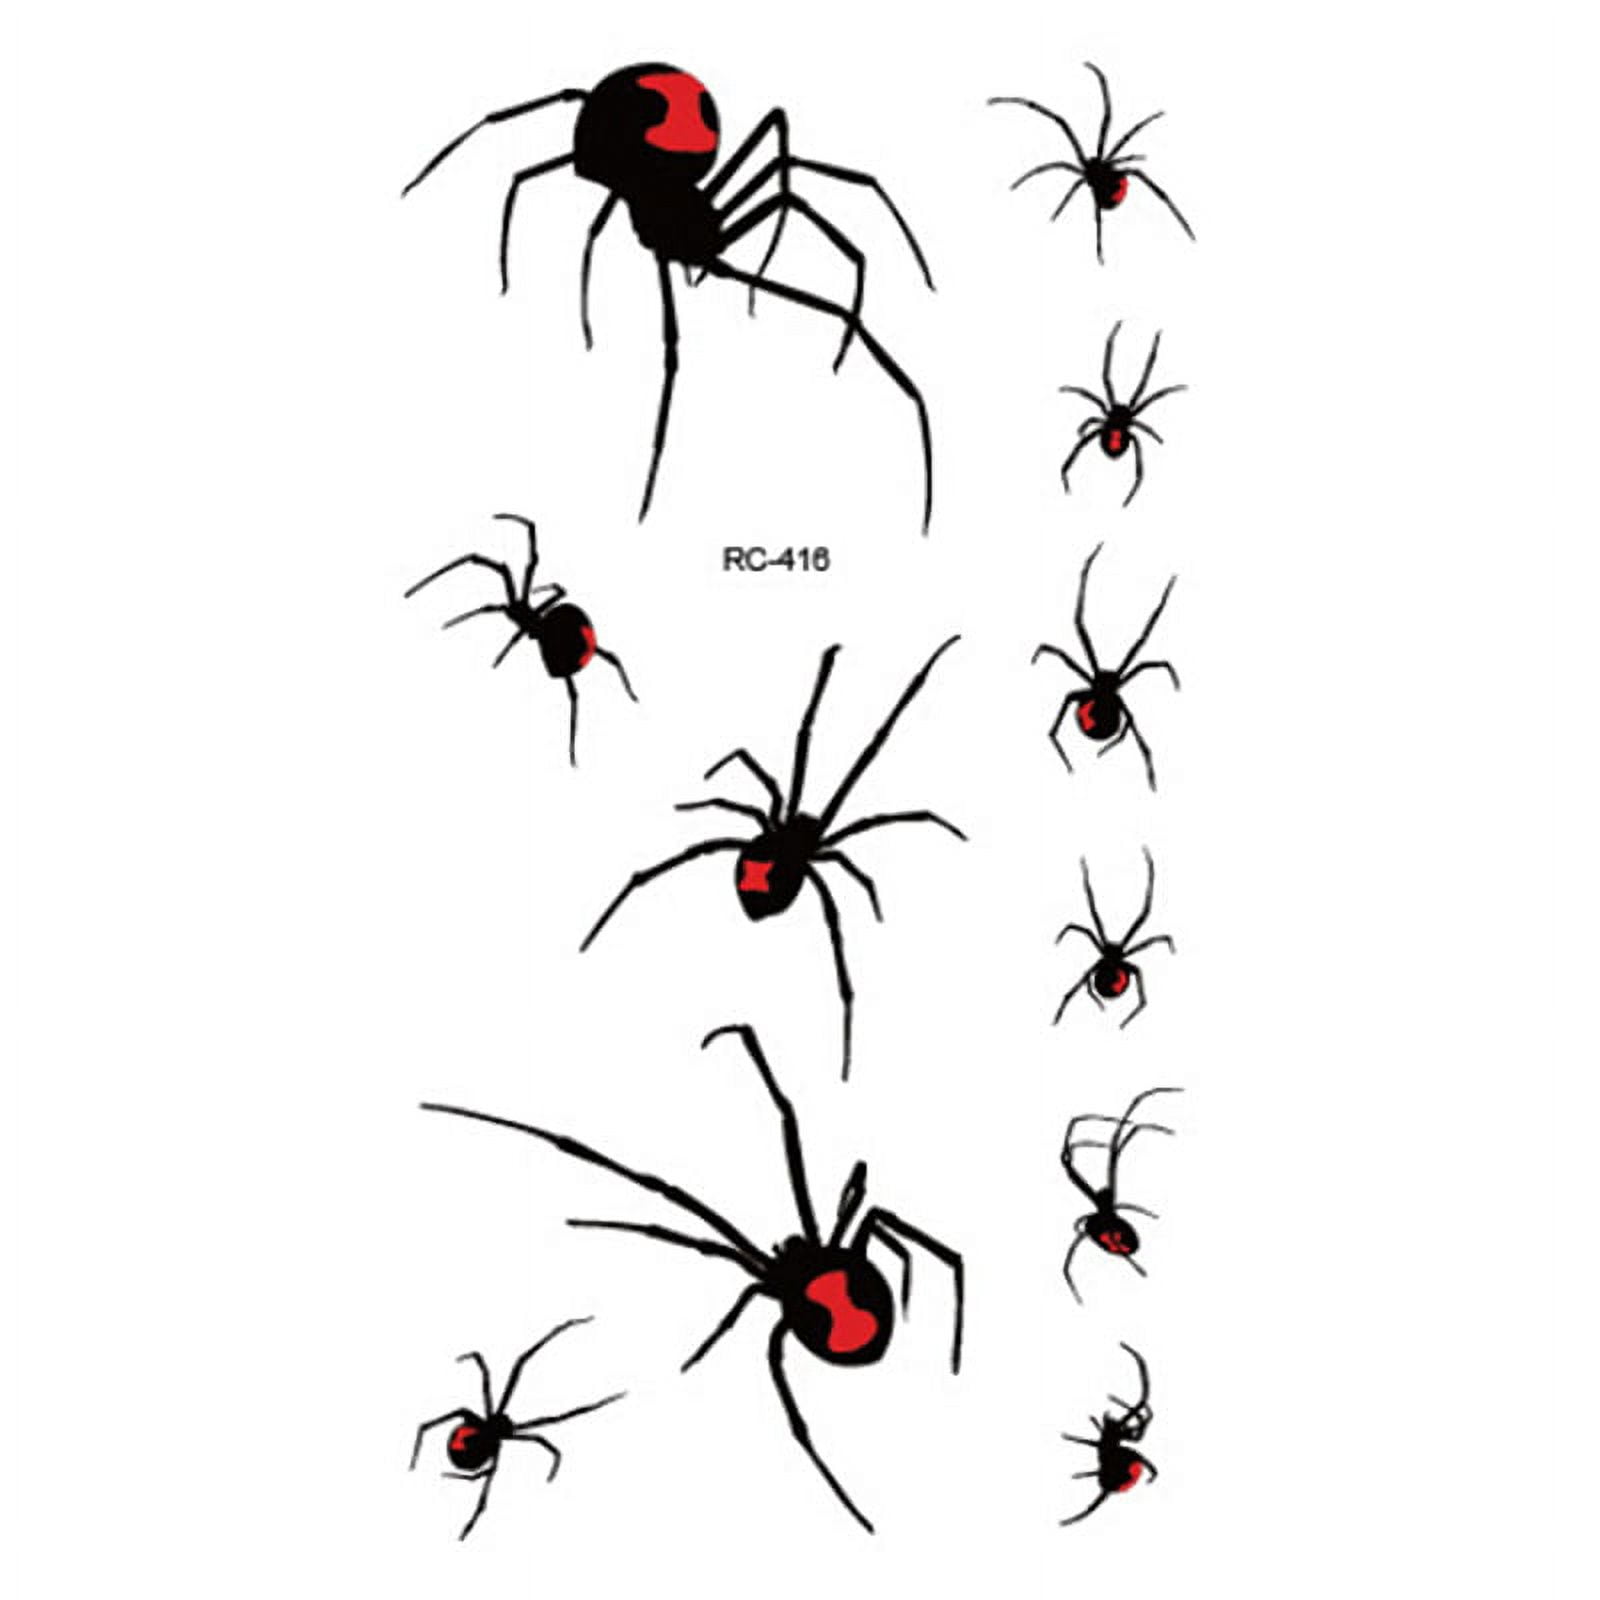 Realistic Black Halloween Spider Halloween Fake Tattoos For Kids DIY Small  Stickers With Scarecrow And Skull Design 230926 From Bian04, $2.94